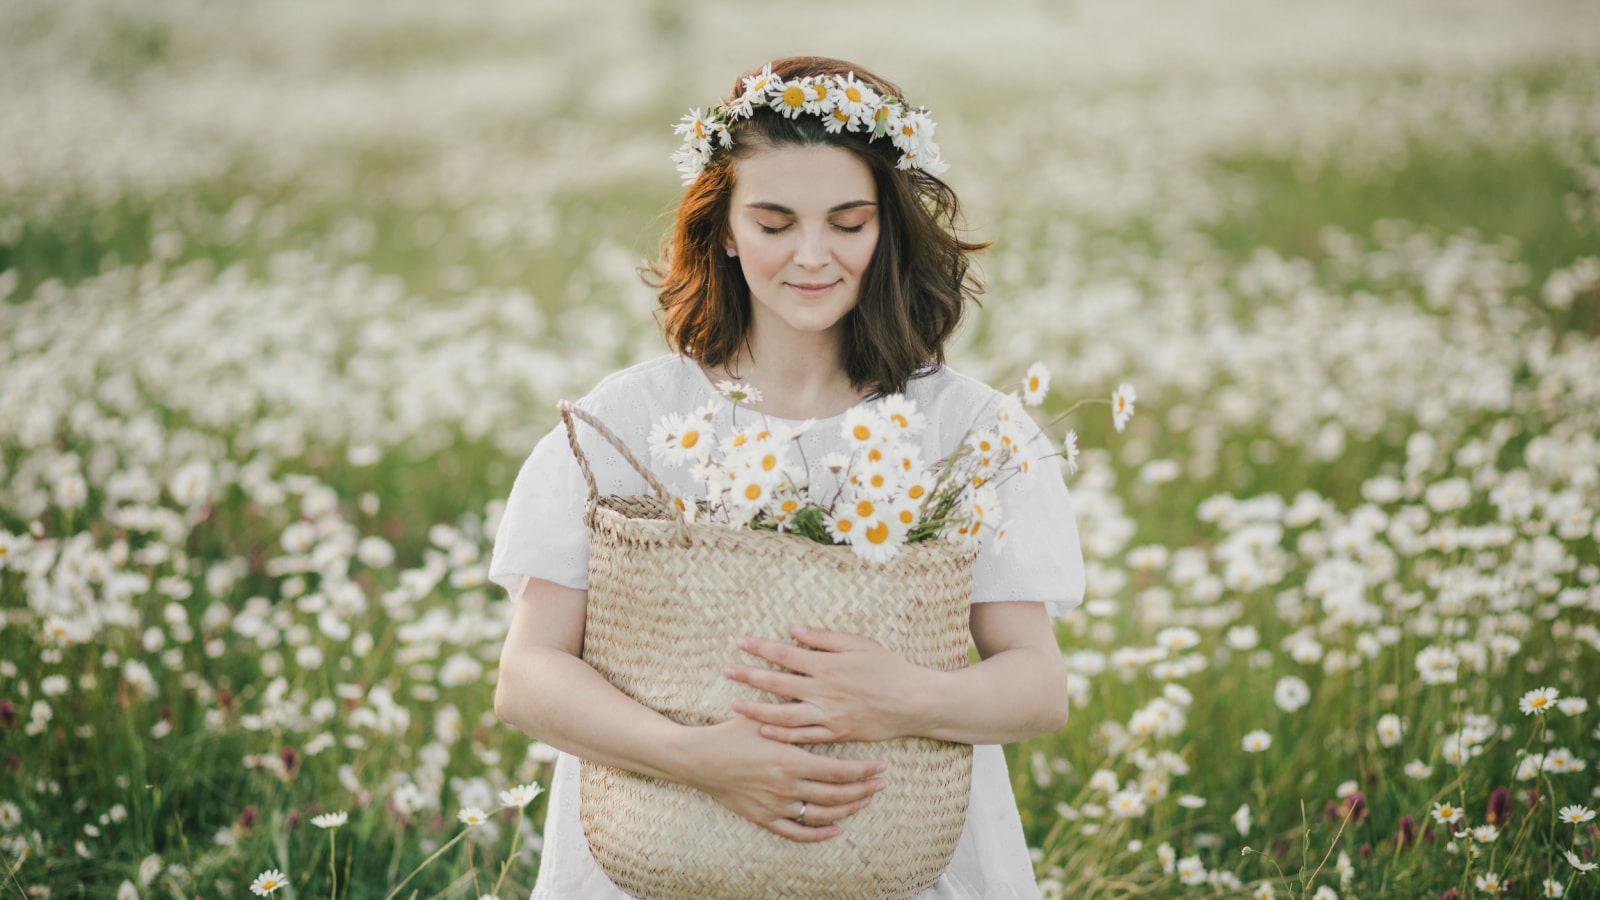 Young woman wearing white dress holding straw basket with flowers on chamomile field. Cottagecore aesthetic.